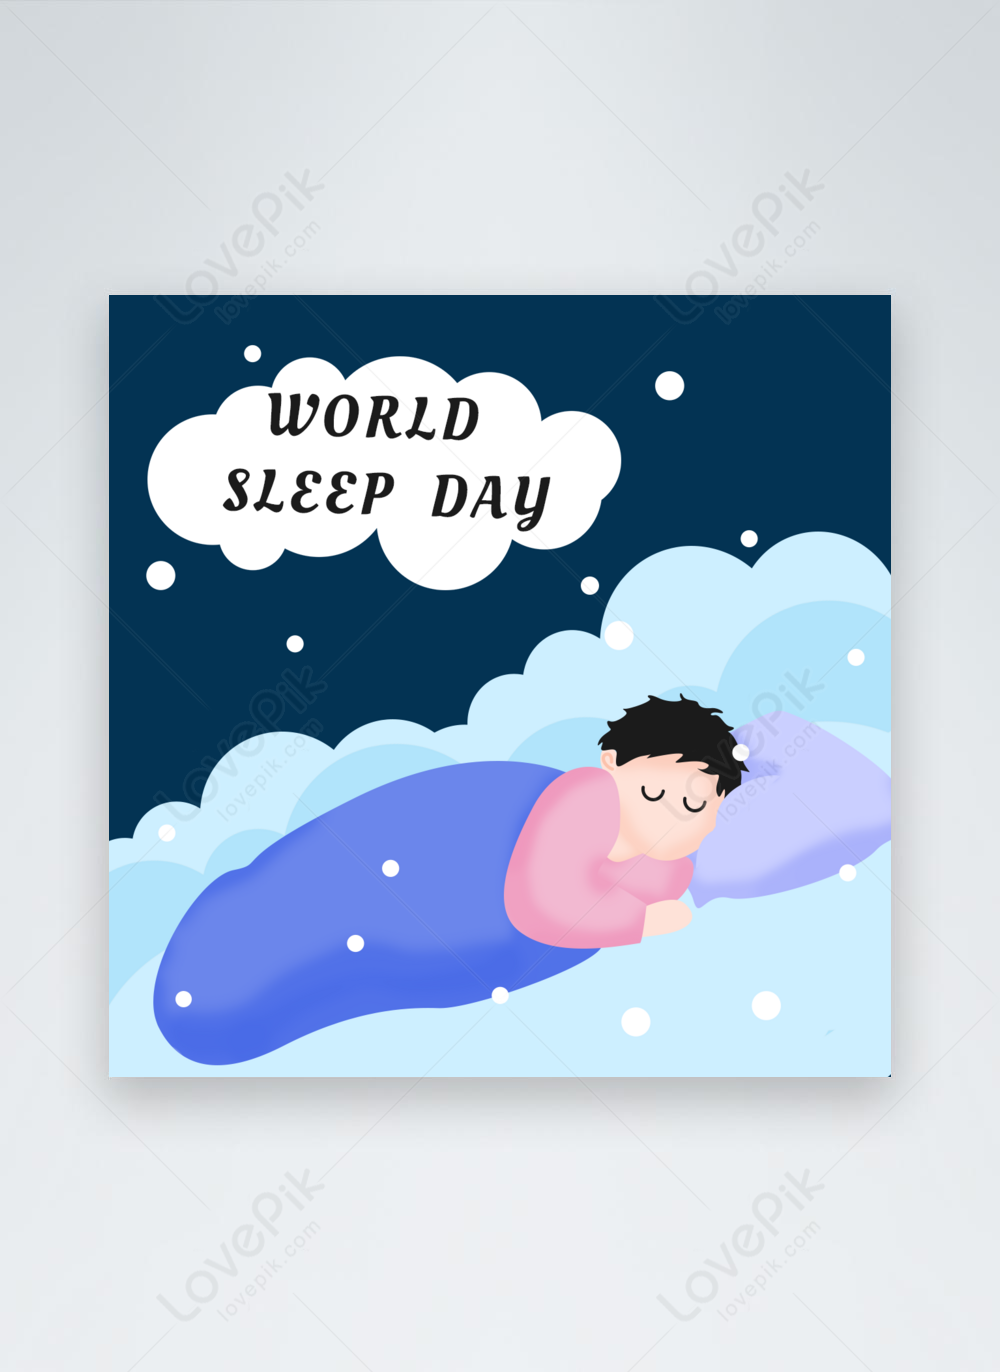 Night cloud boy world sleep day template image_picture free download  